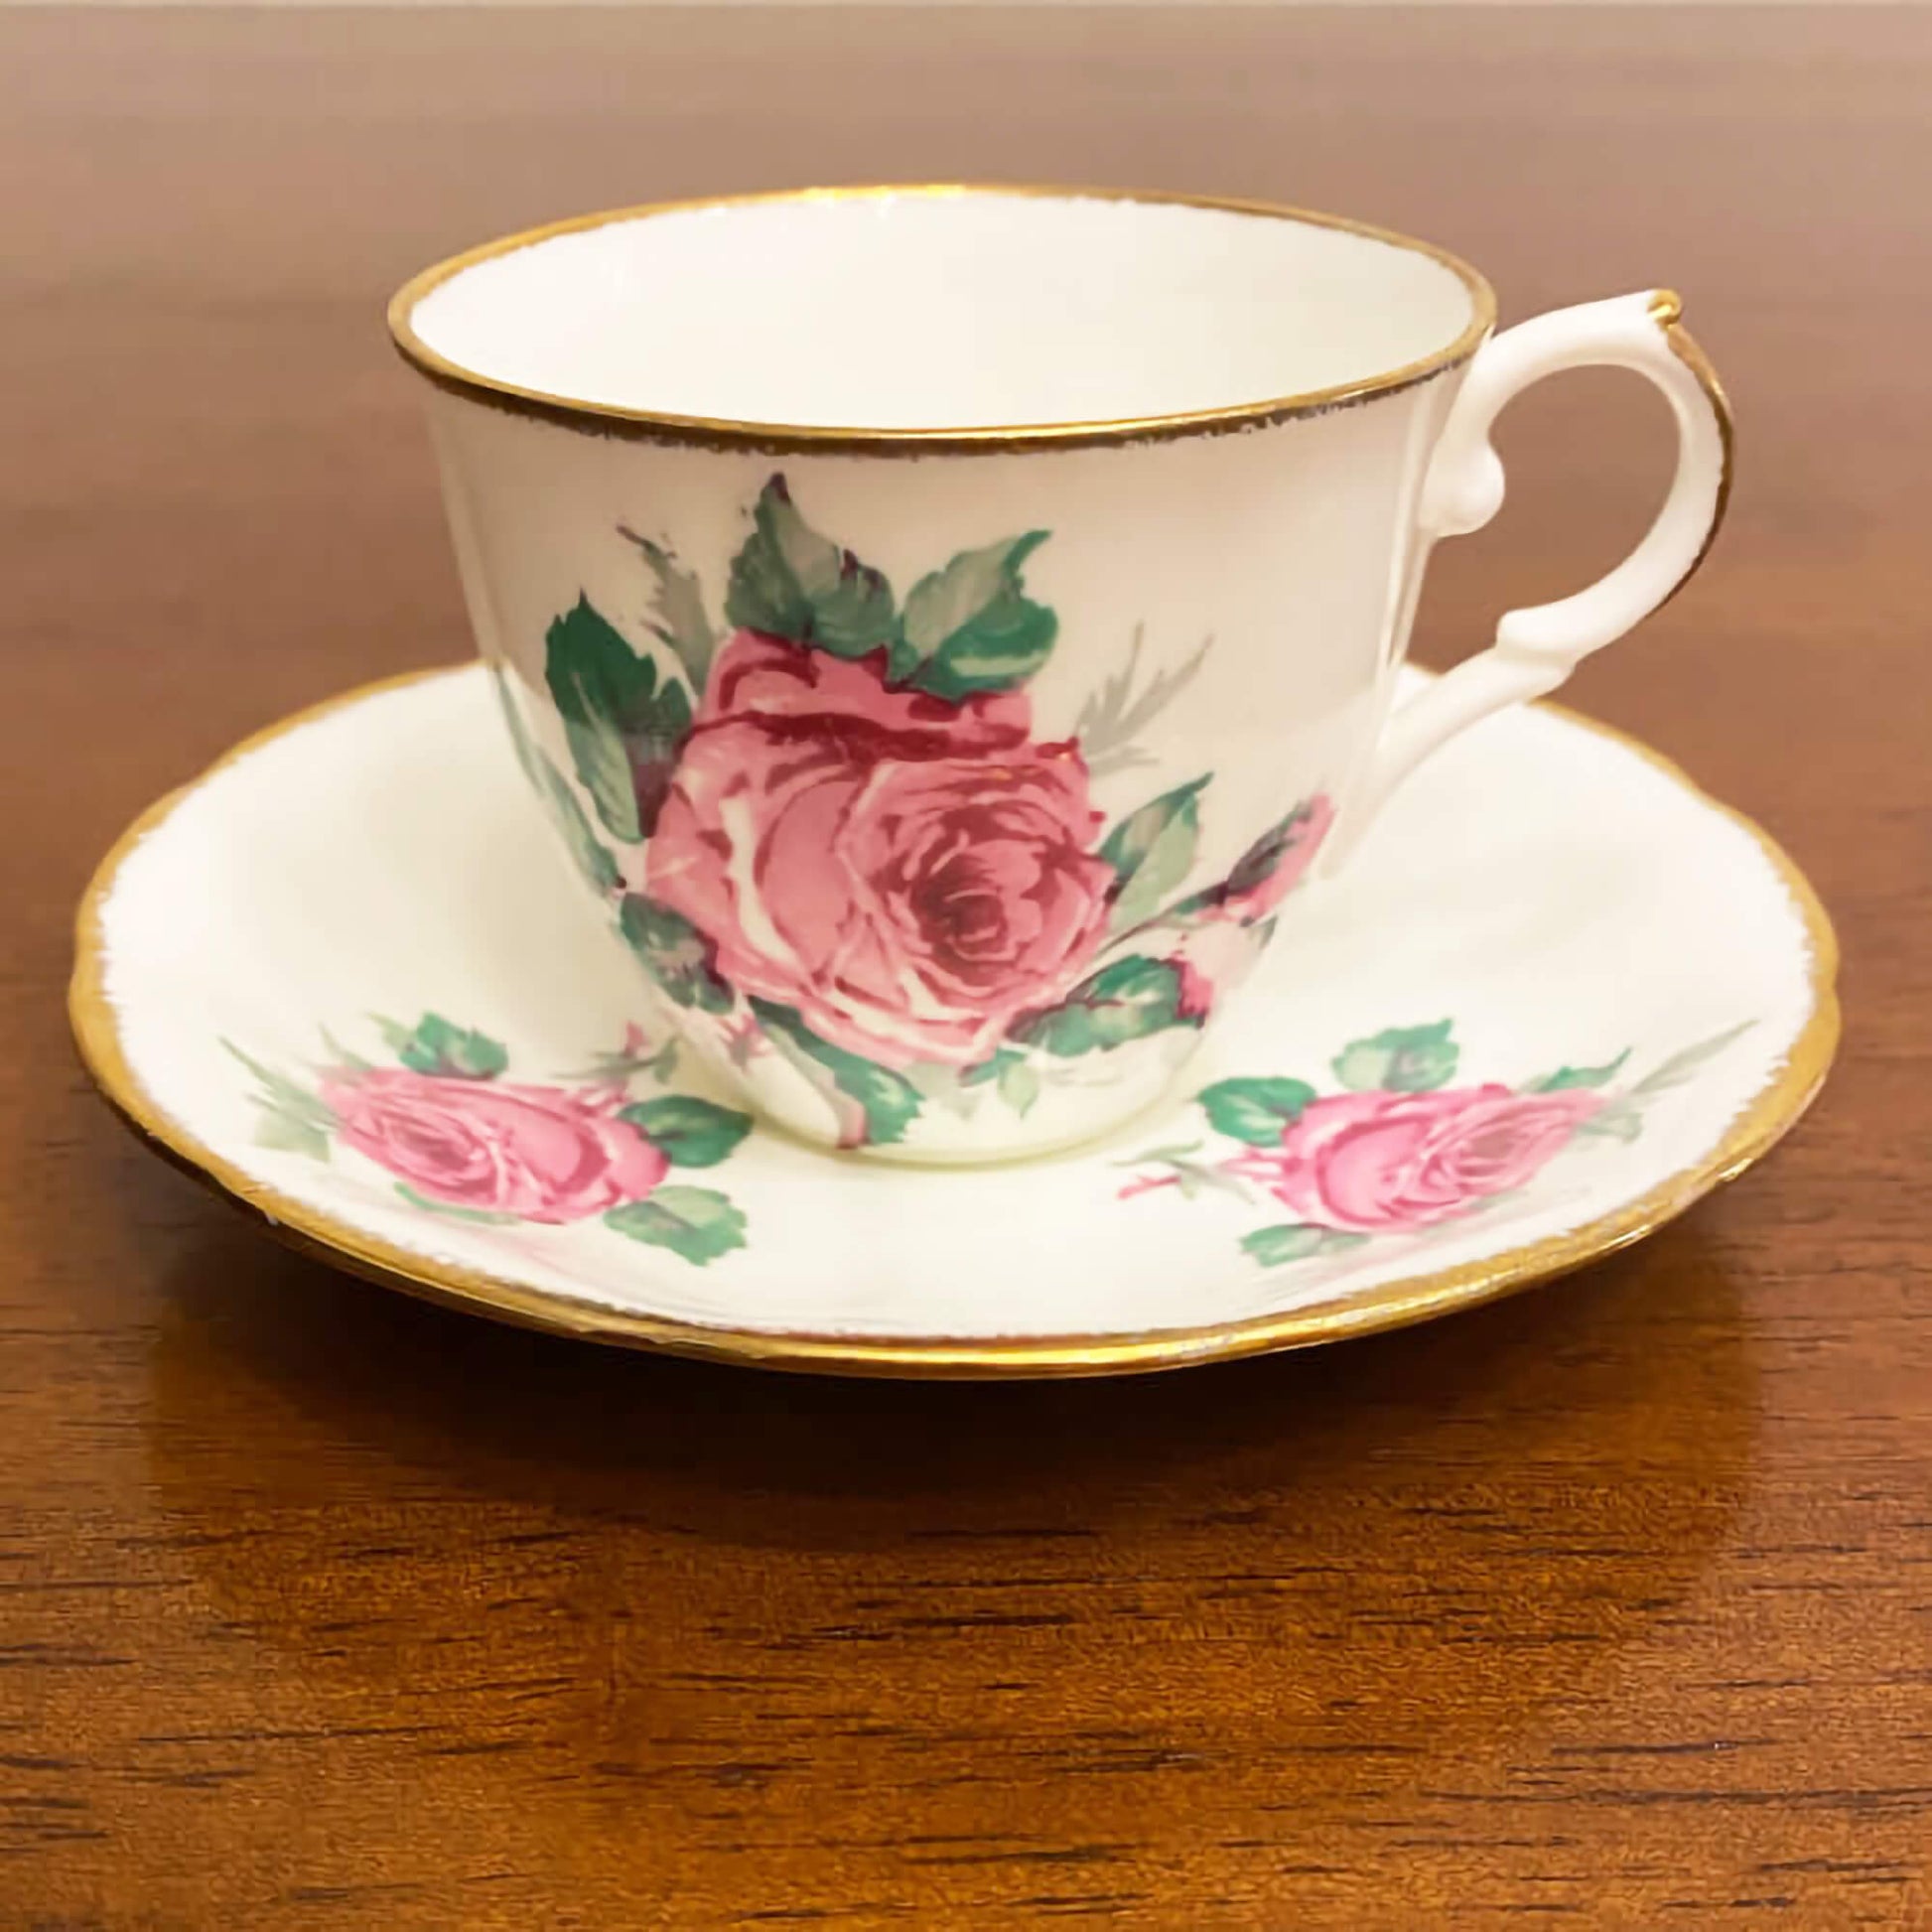 Jason-bone-china-collectible-teacup-and-saucer-set,-#J554,-featuring-pink-roses-and-green-leaves,-accented-by-gilt-trim-on-the-edge-of-the-cup-and-saucer.-Excellent-condition.-Makes-a-great-gift.-Shop-eBargainsAndDeals.com.